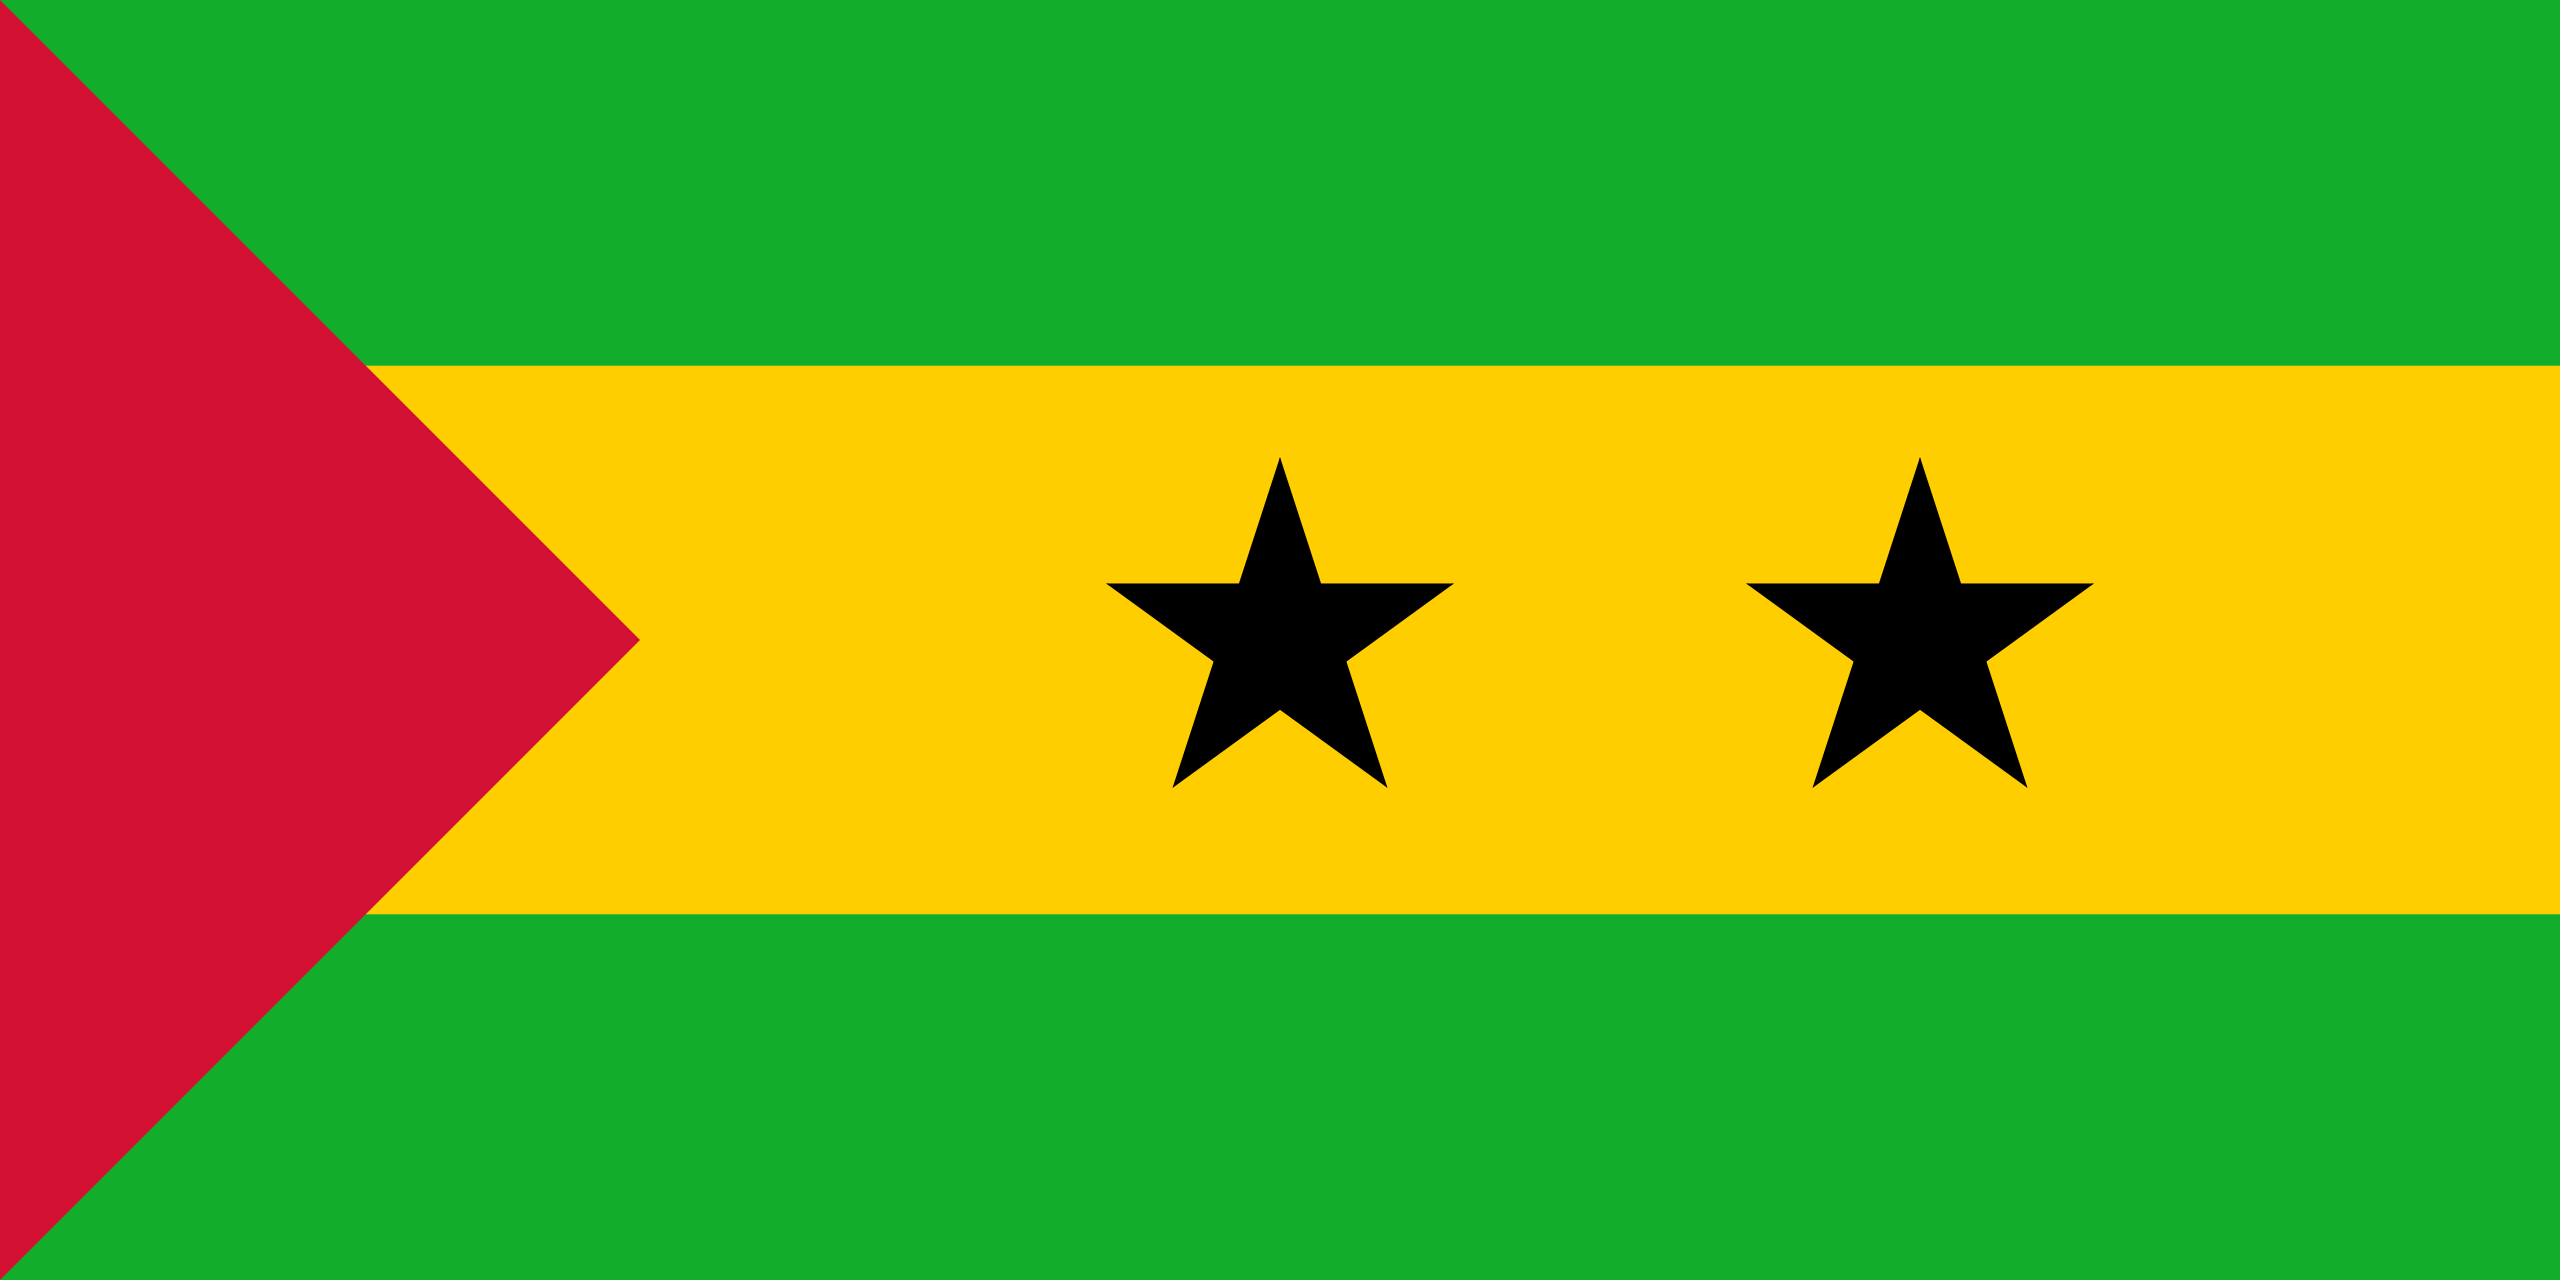 a green and yellow flag with black stars